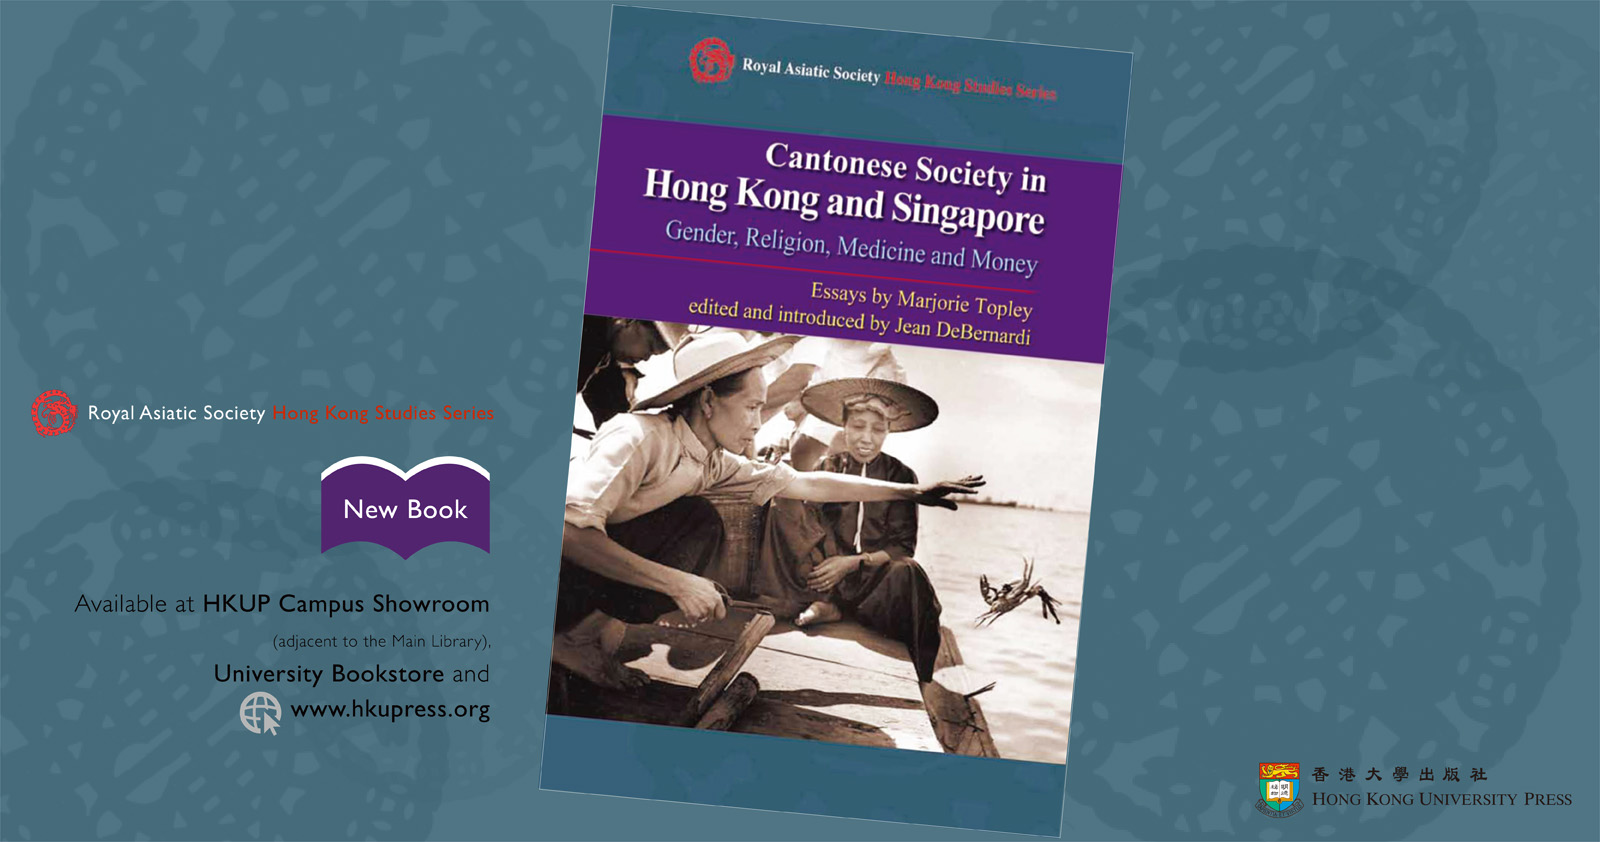 New book from HKUP - Cantonese Society in Hong Kong and Singapore